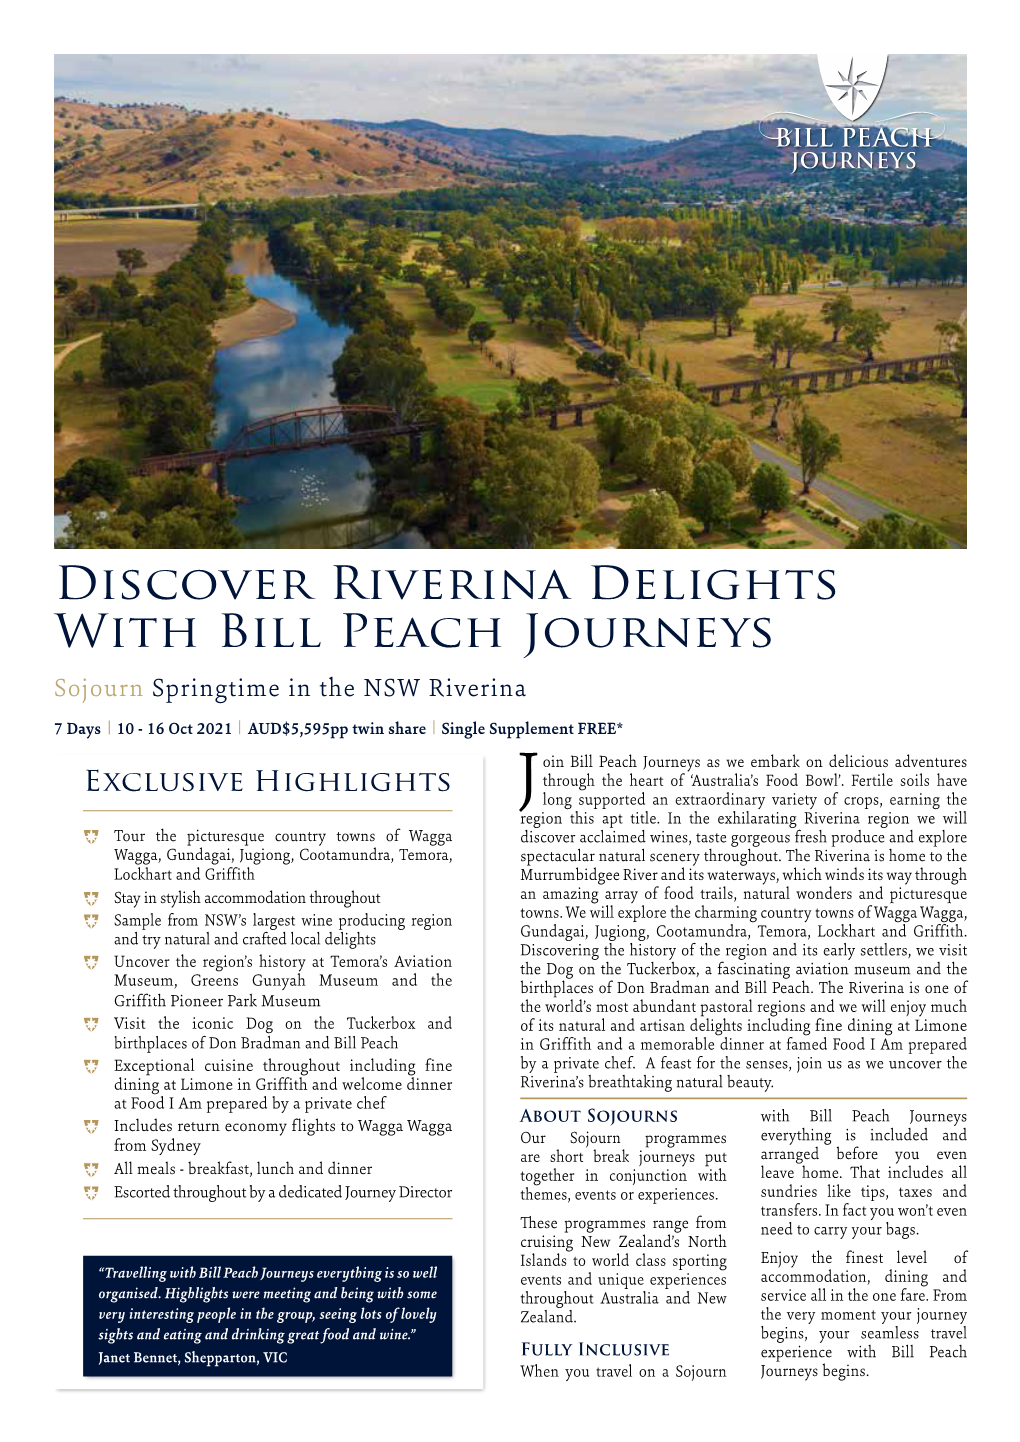 Discover Riverina Delights with Bill Peach Journeys Sojourn Springtime in the NSW Riverina